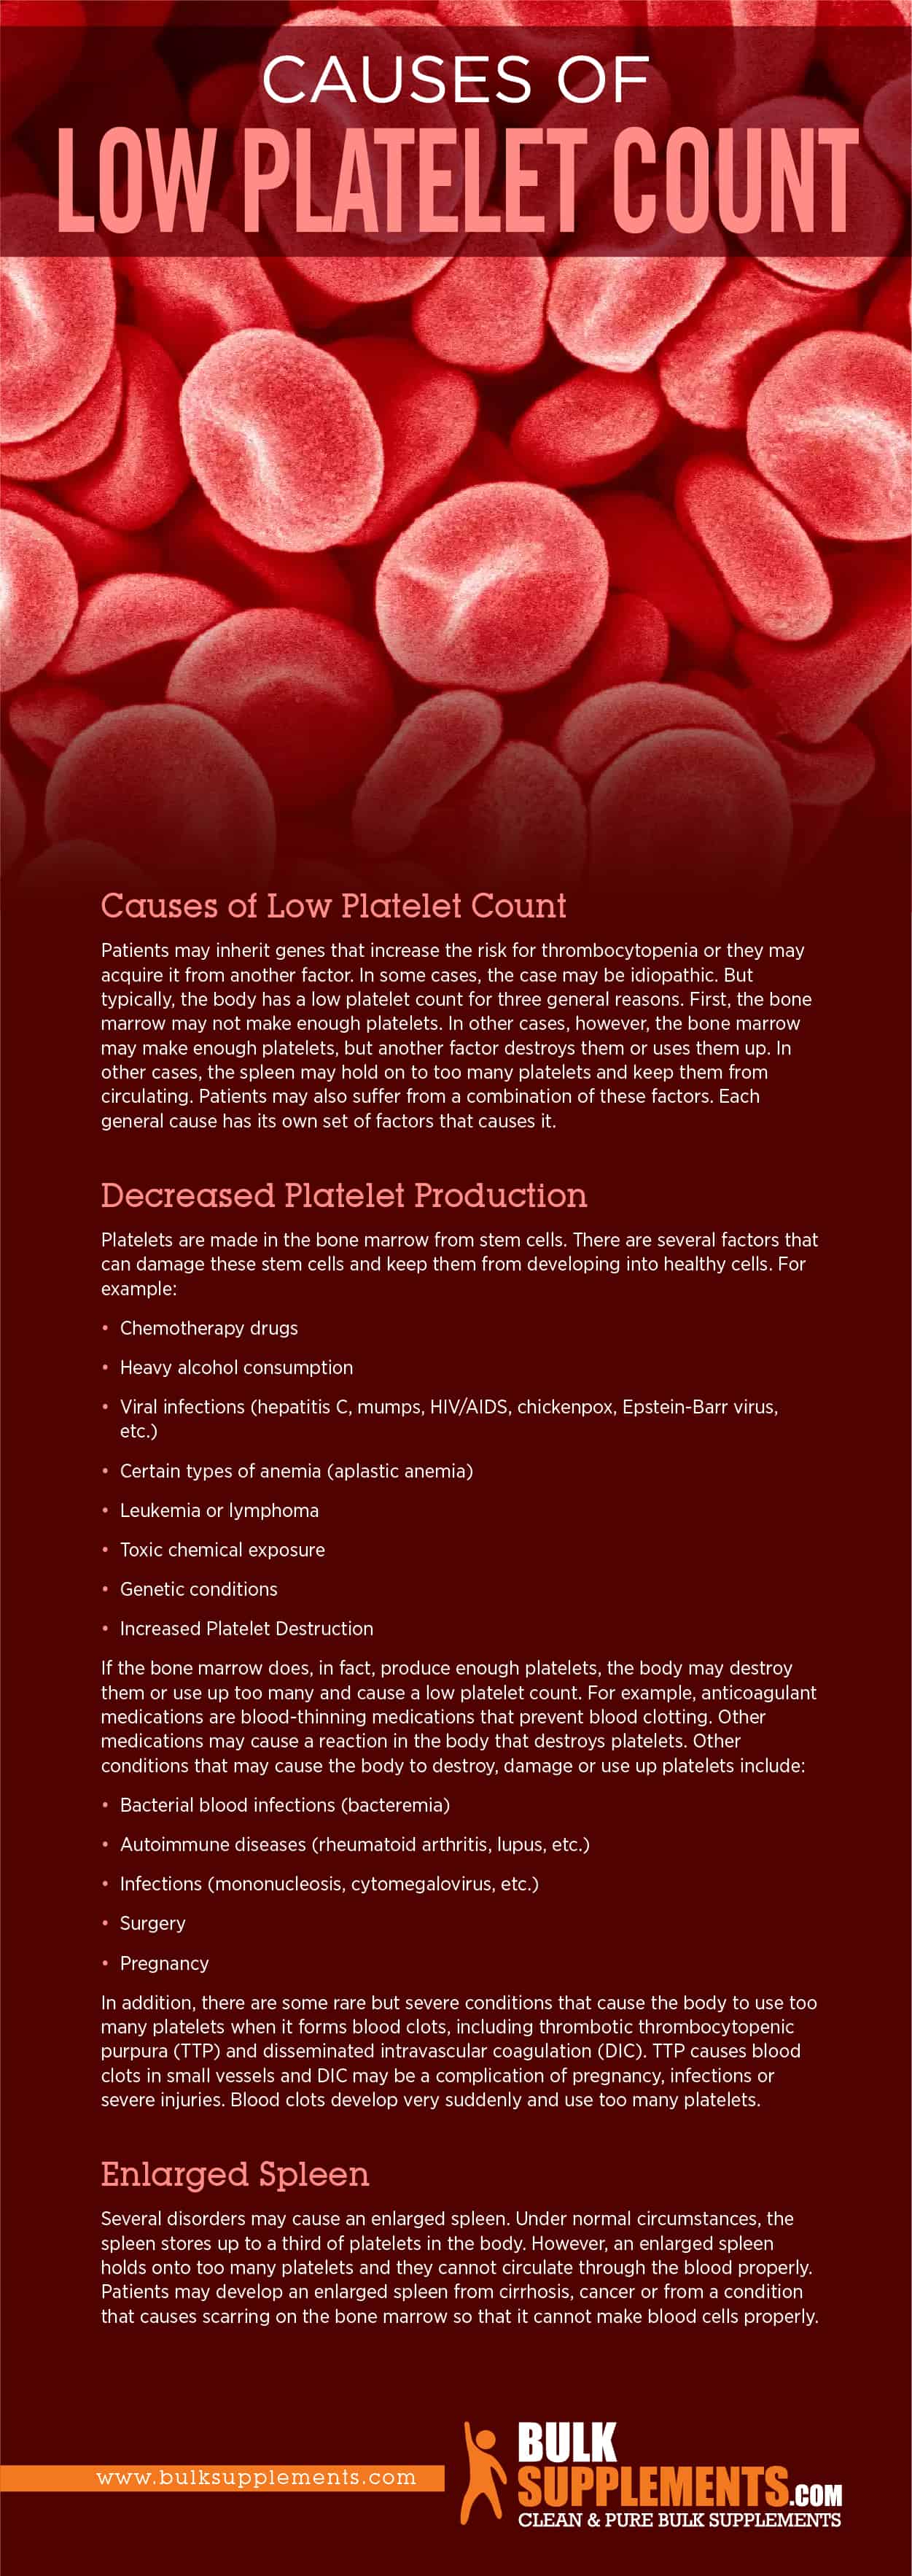 Causes of Low Platelet Count